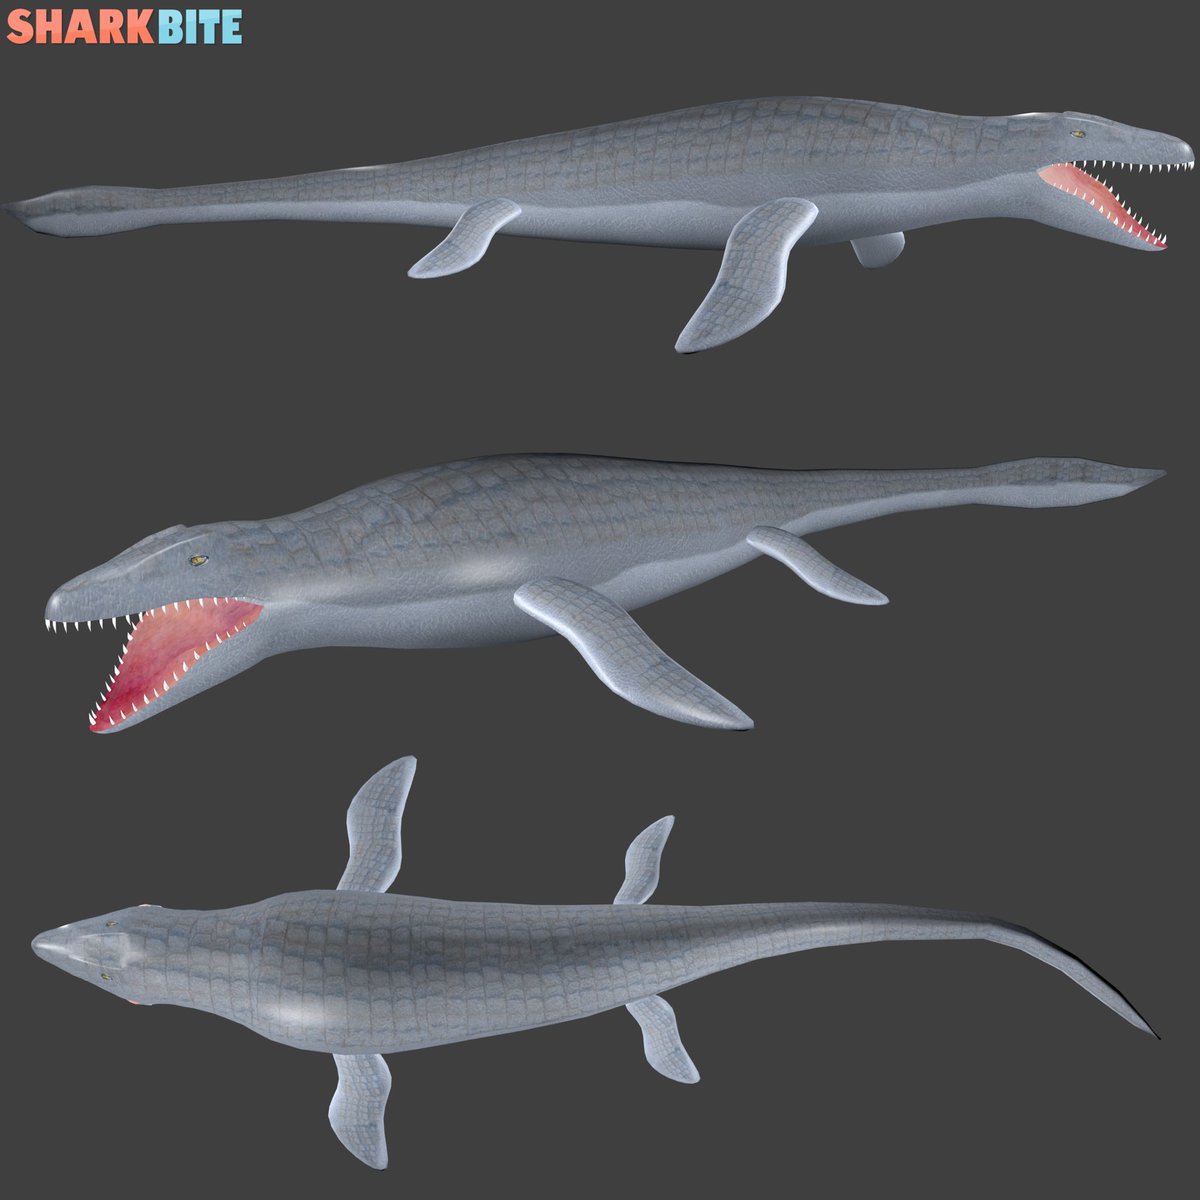 Opplo At Rblxopplo Twitter - introducing sharkbites newest greatest largest apex predator yet the mosasaurus you guys requested it so were excited to confirm the mosasaurus will